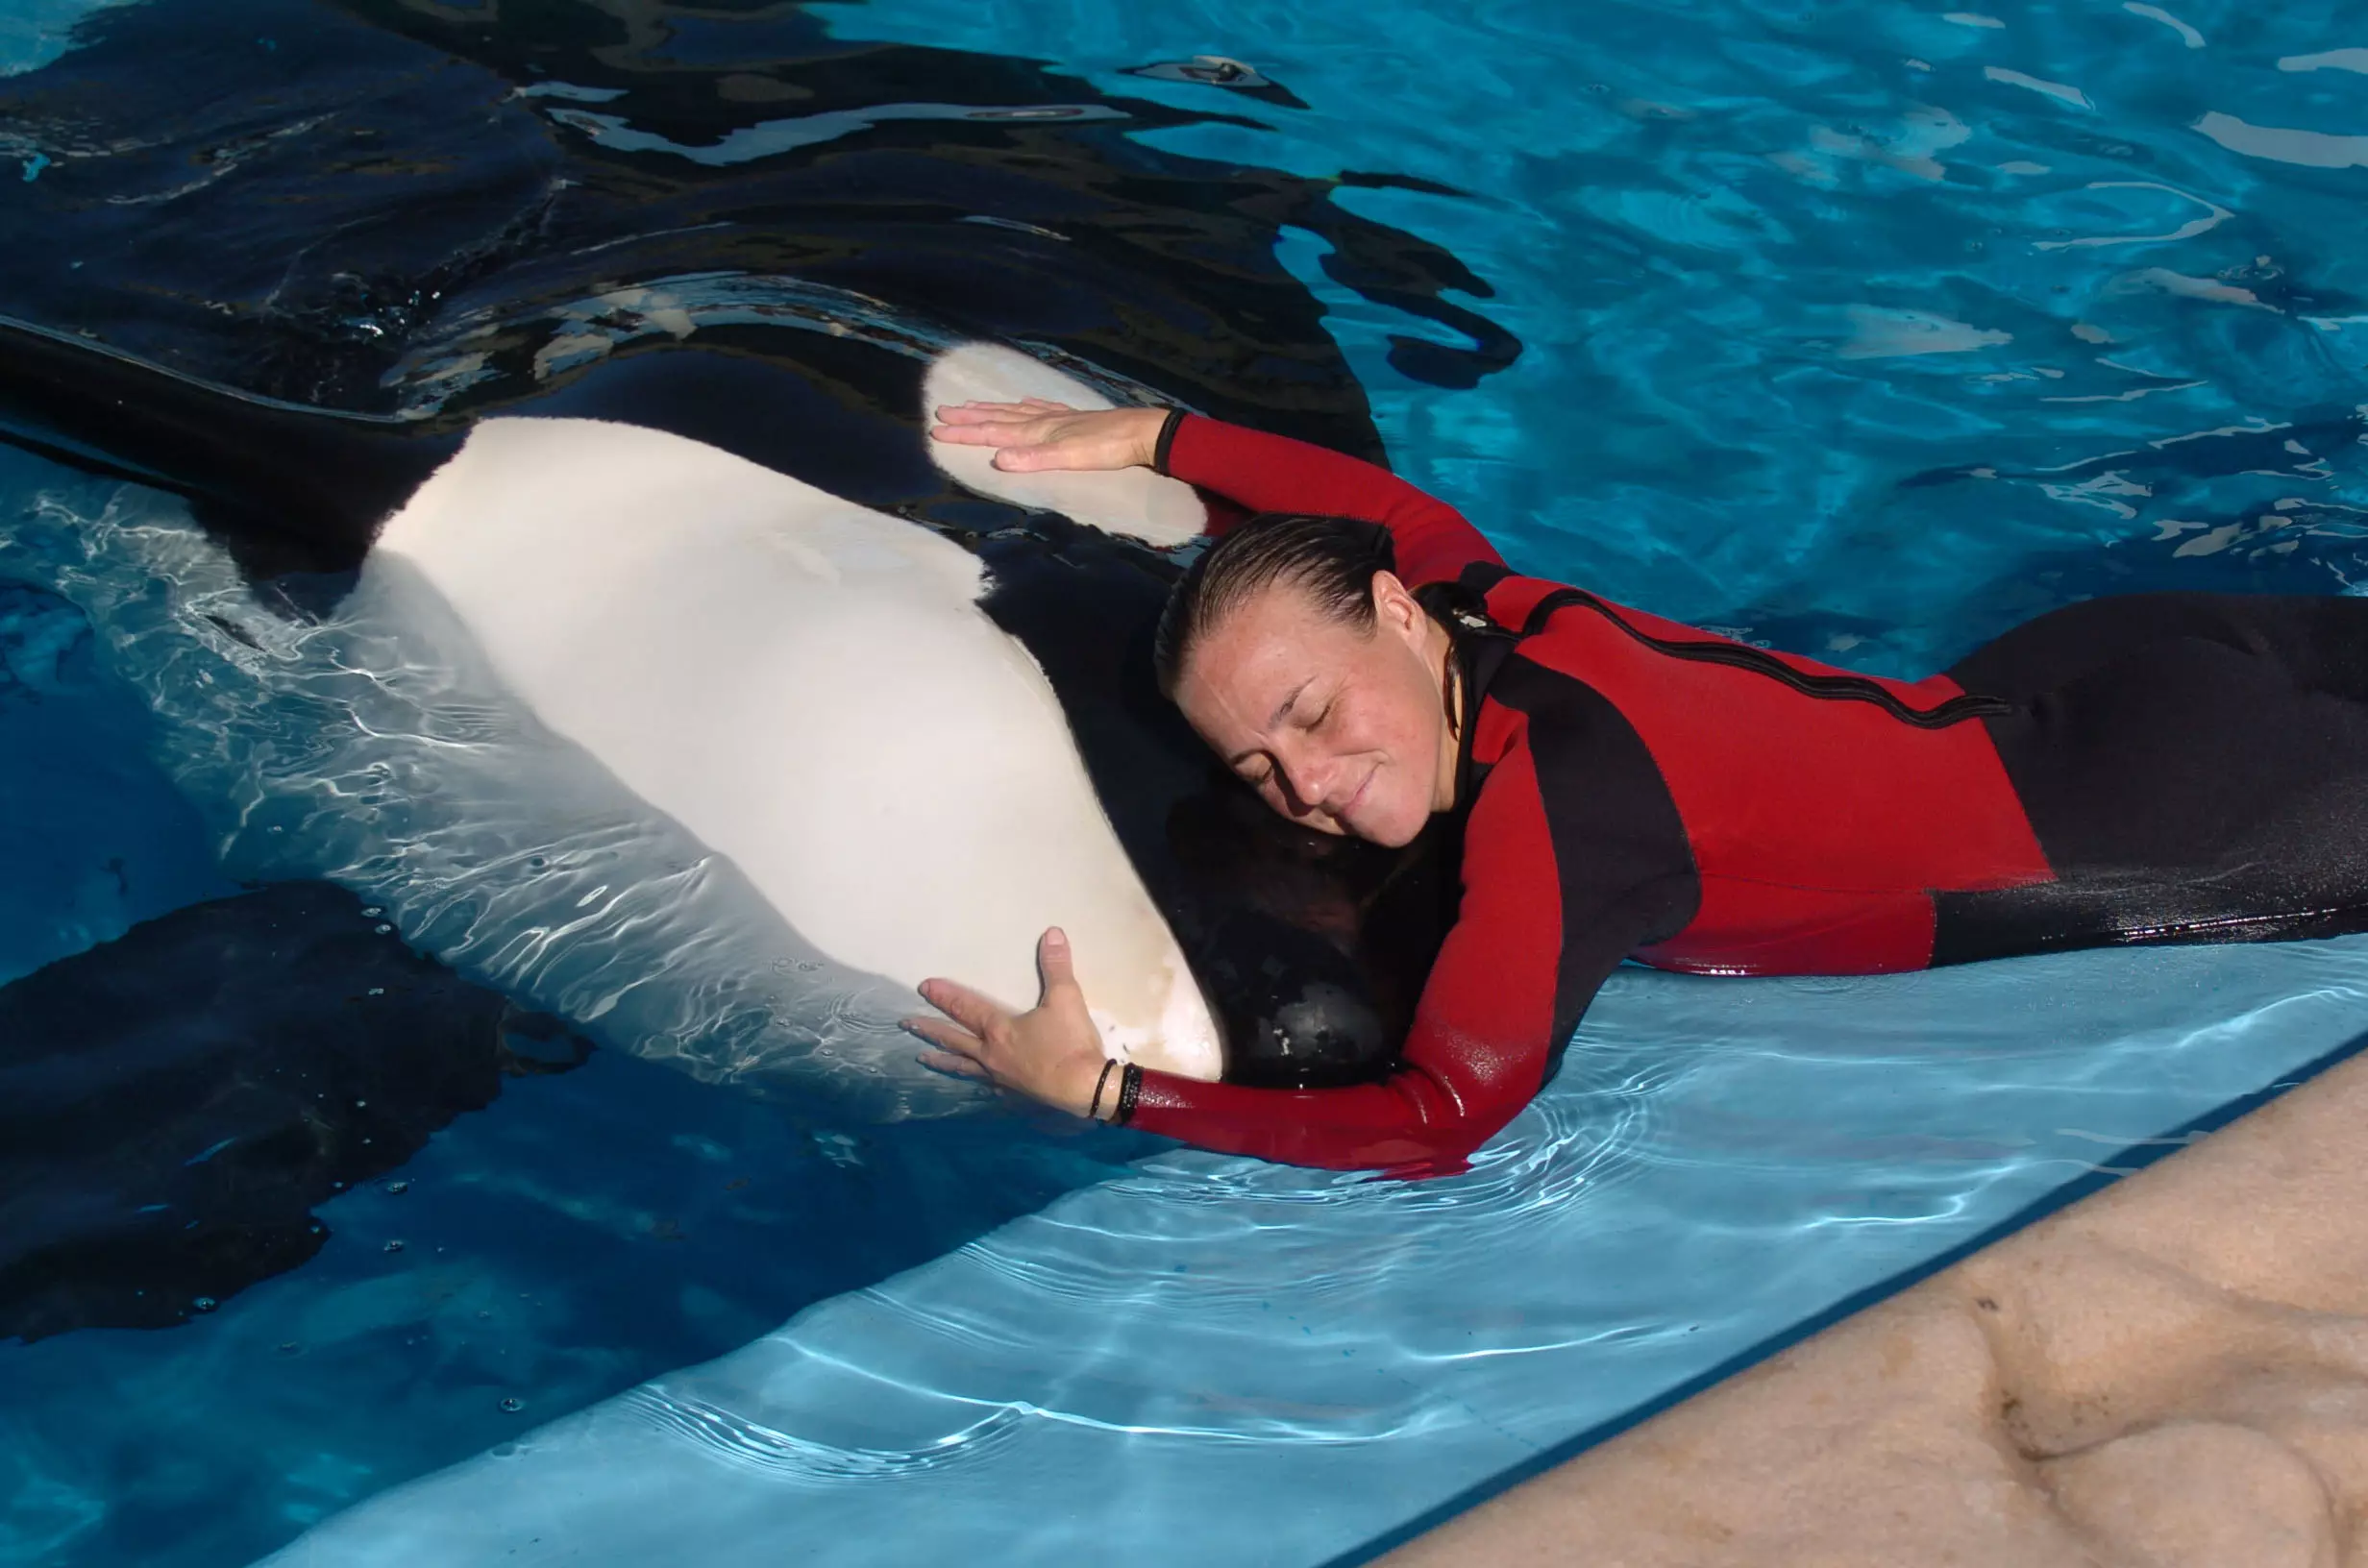 Dawn Brancheau with one of the killer whales in 2005.